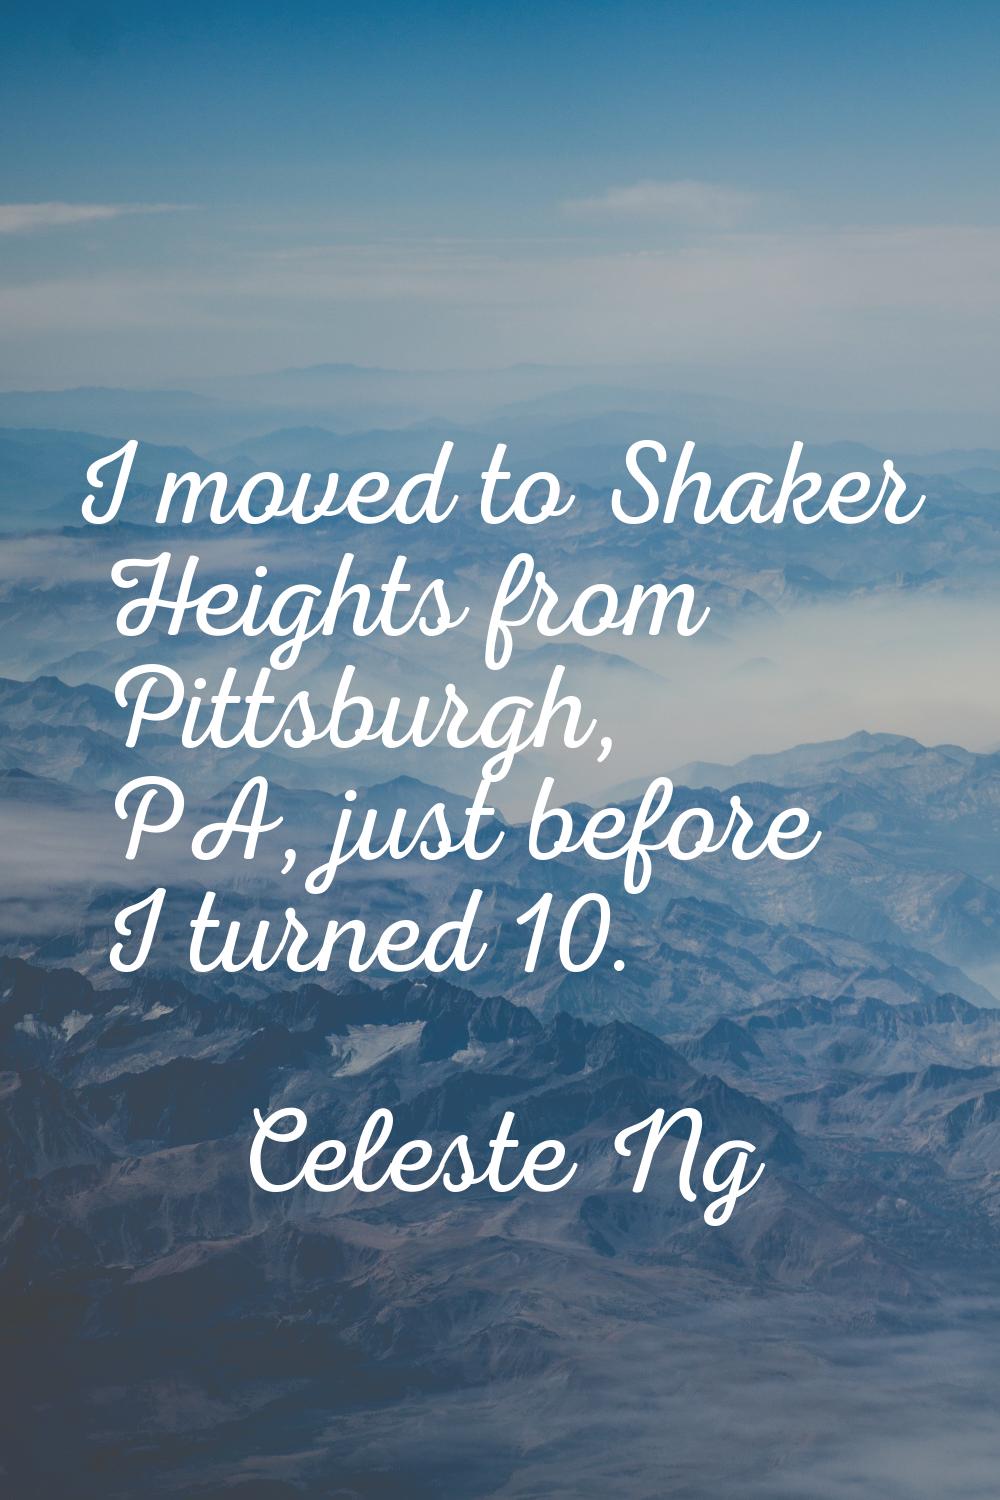 I moved to Shaker Heights from Pittsburgh, PA, just before I turned 10.